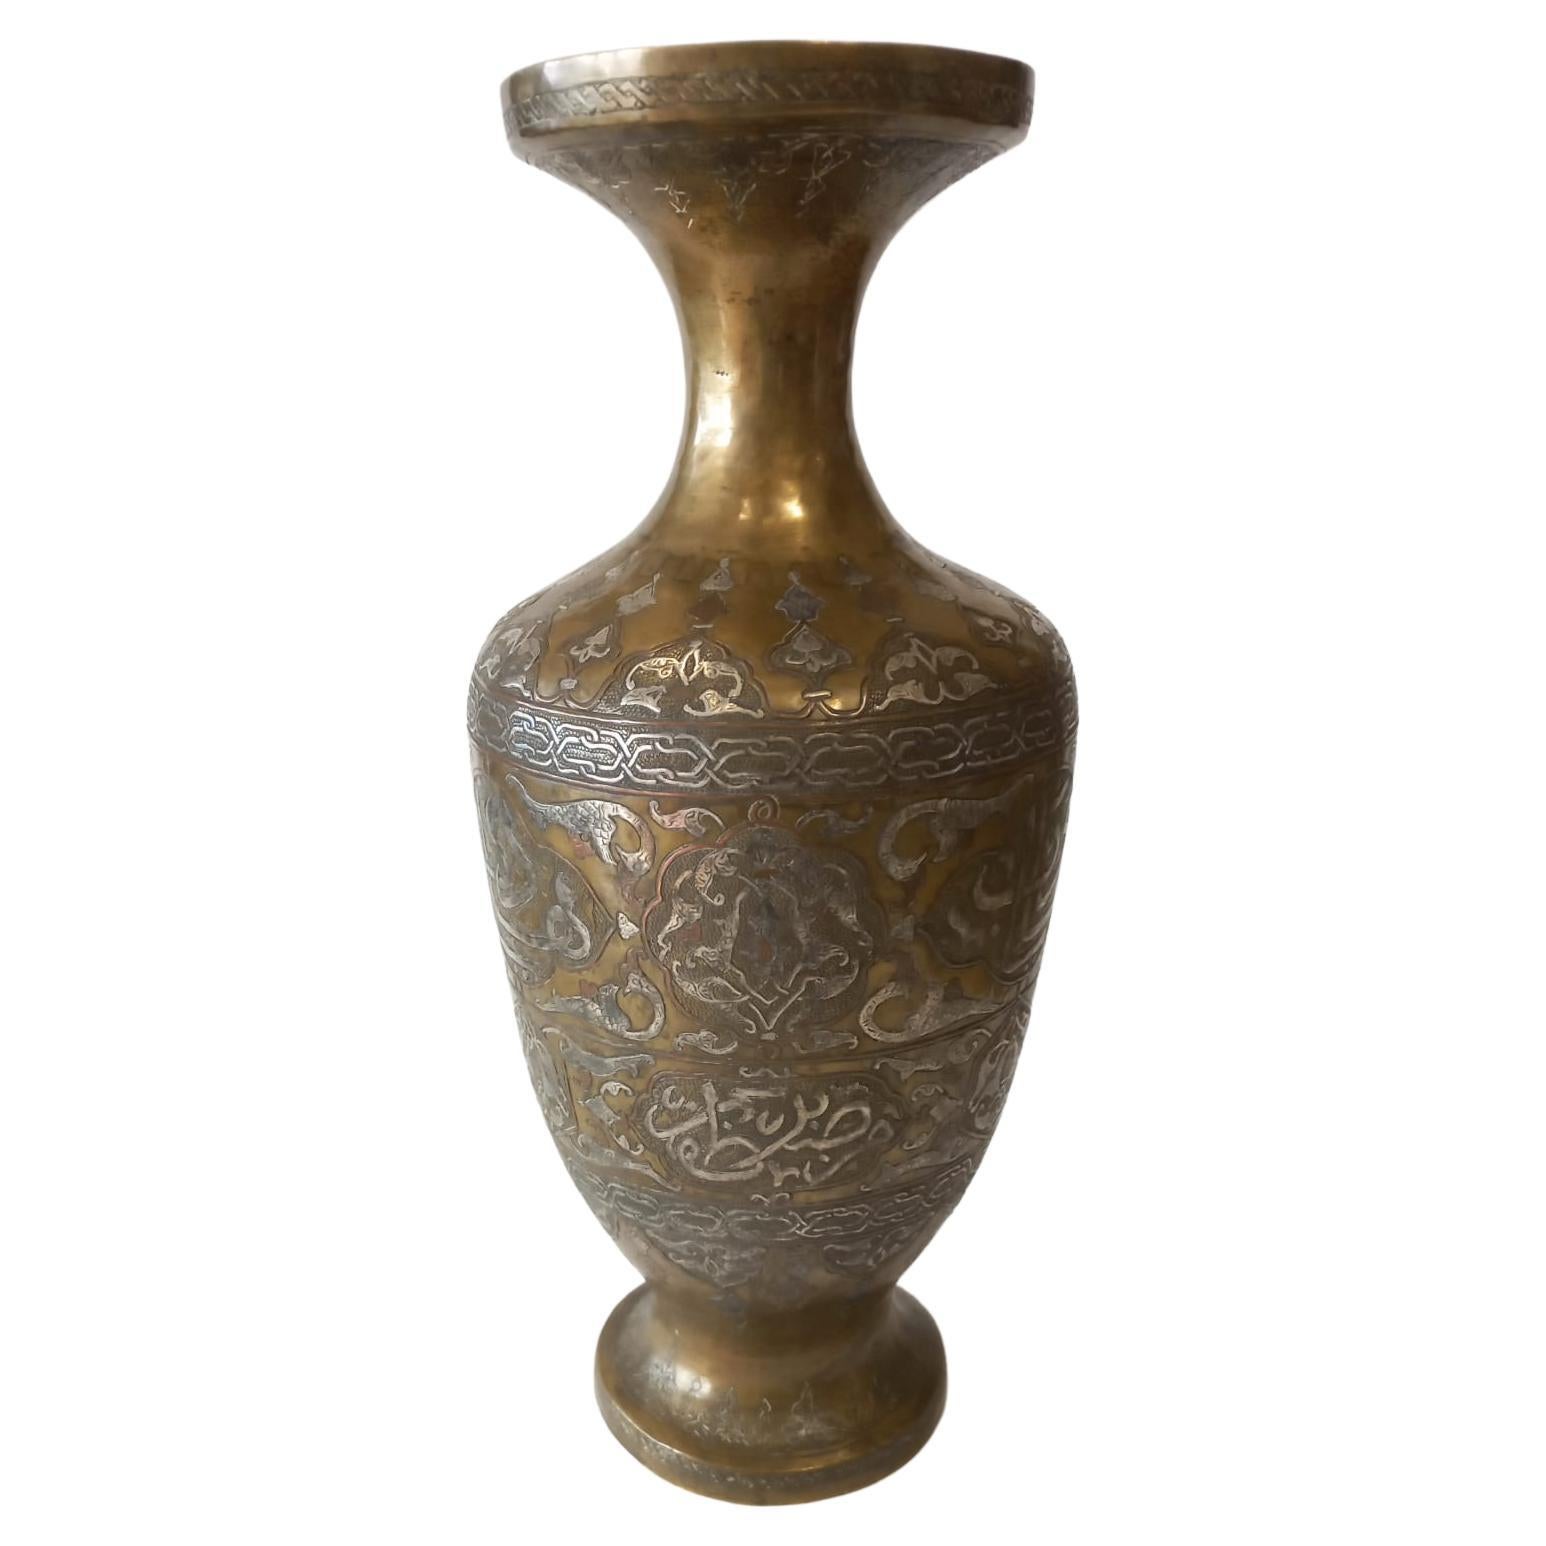 Antique Persian Islamic Brass Vase with Silver Inlay 19th Century For Sale 6